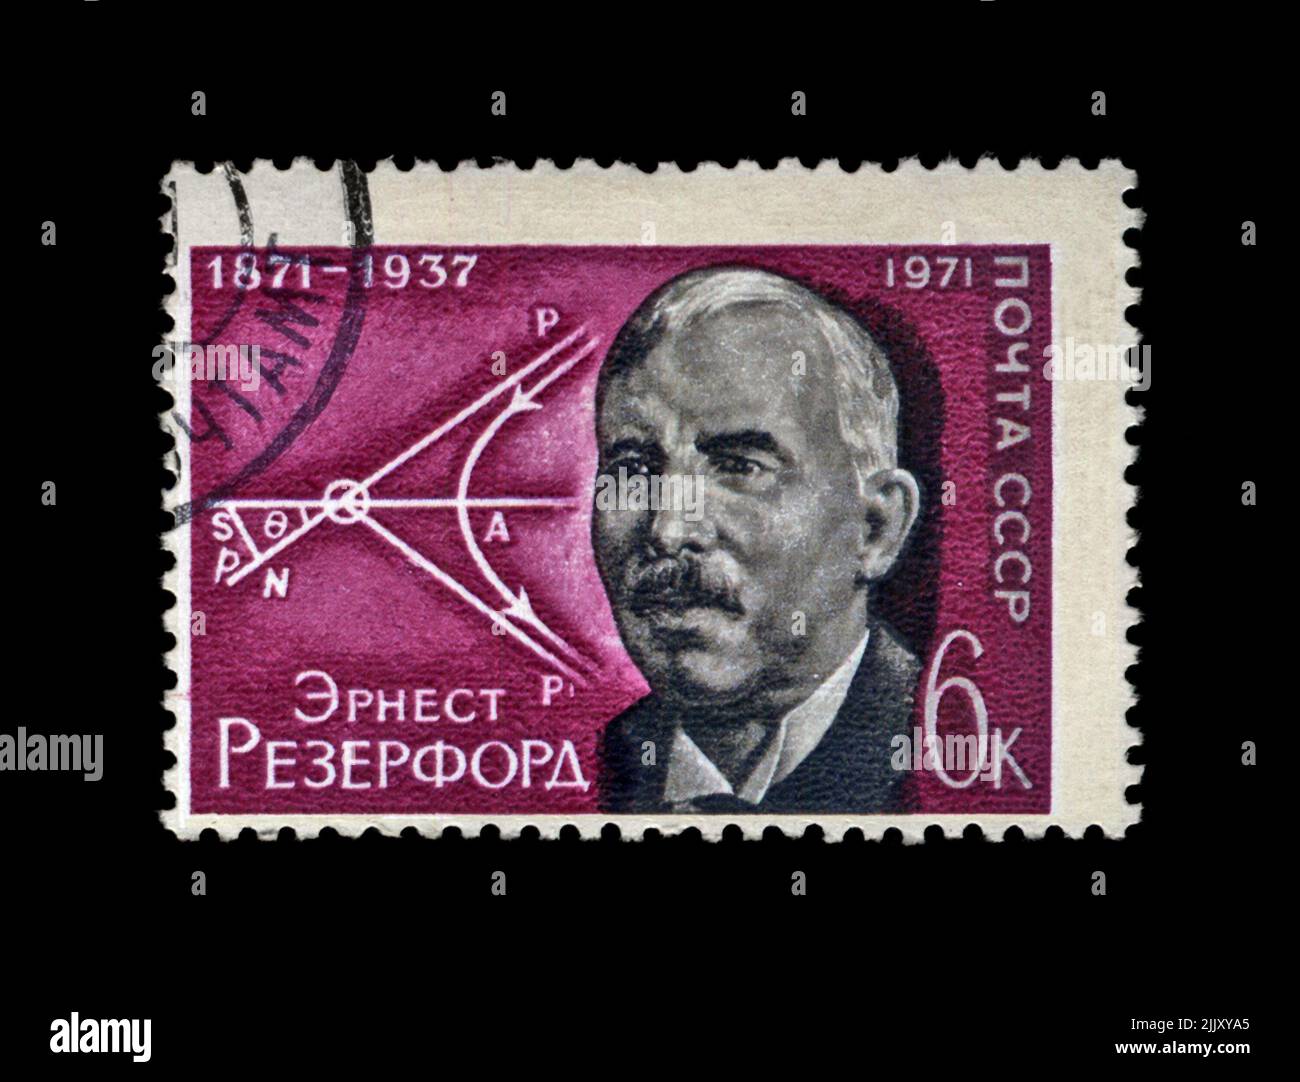 Ernest Rutherford (1871-1937) and diagram of movement of atomic particles, circa 1971.famous scientist. canceled stamp printed in the USSR. Stock Photo